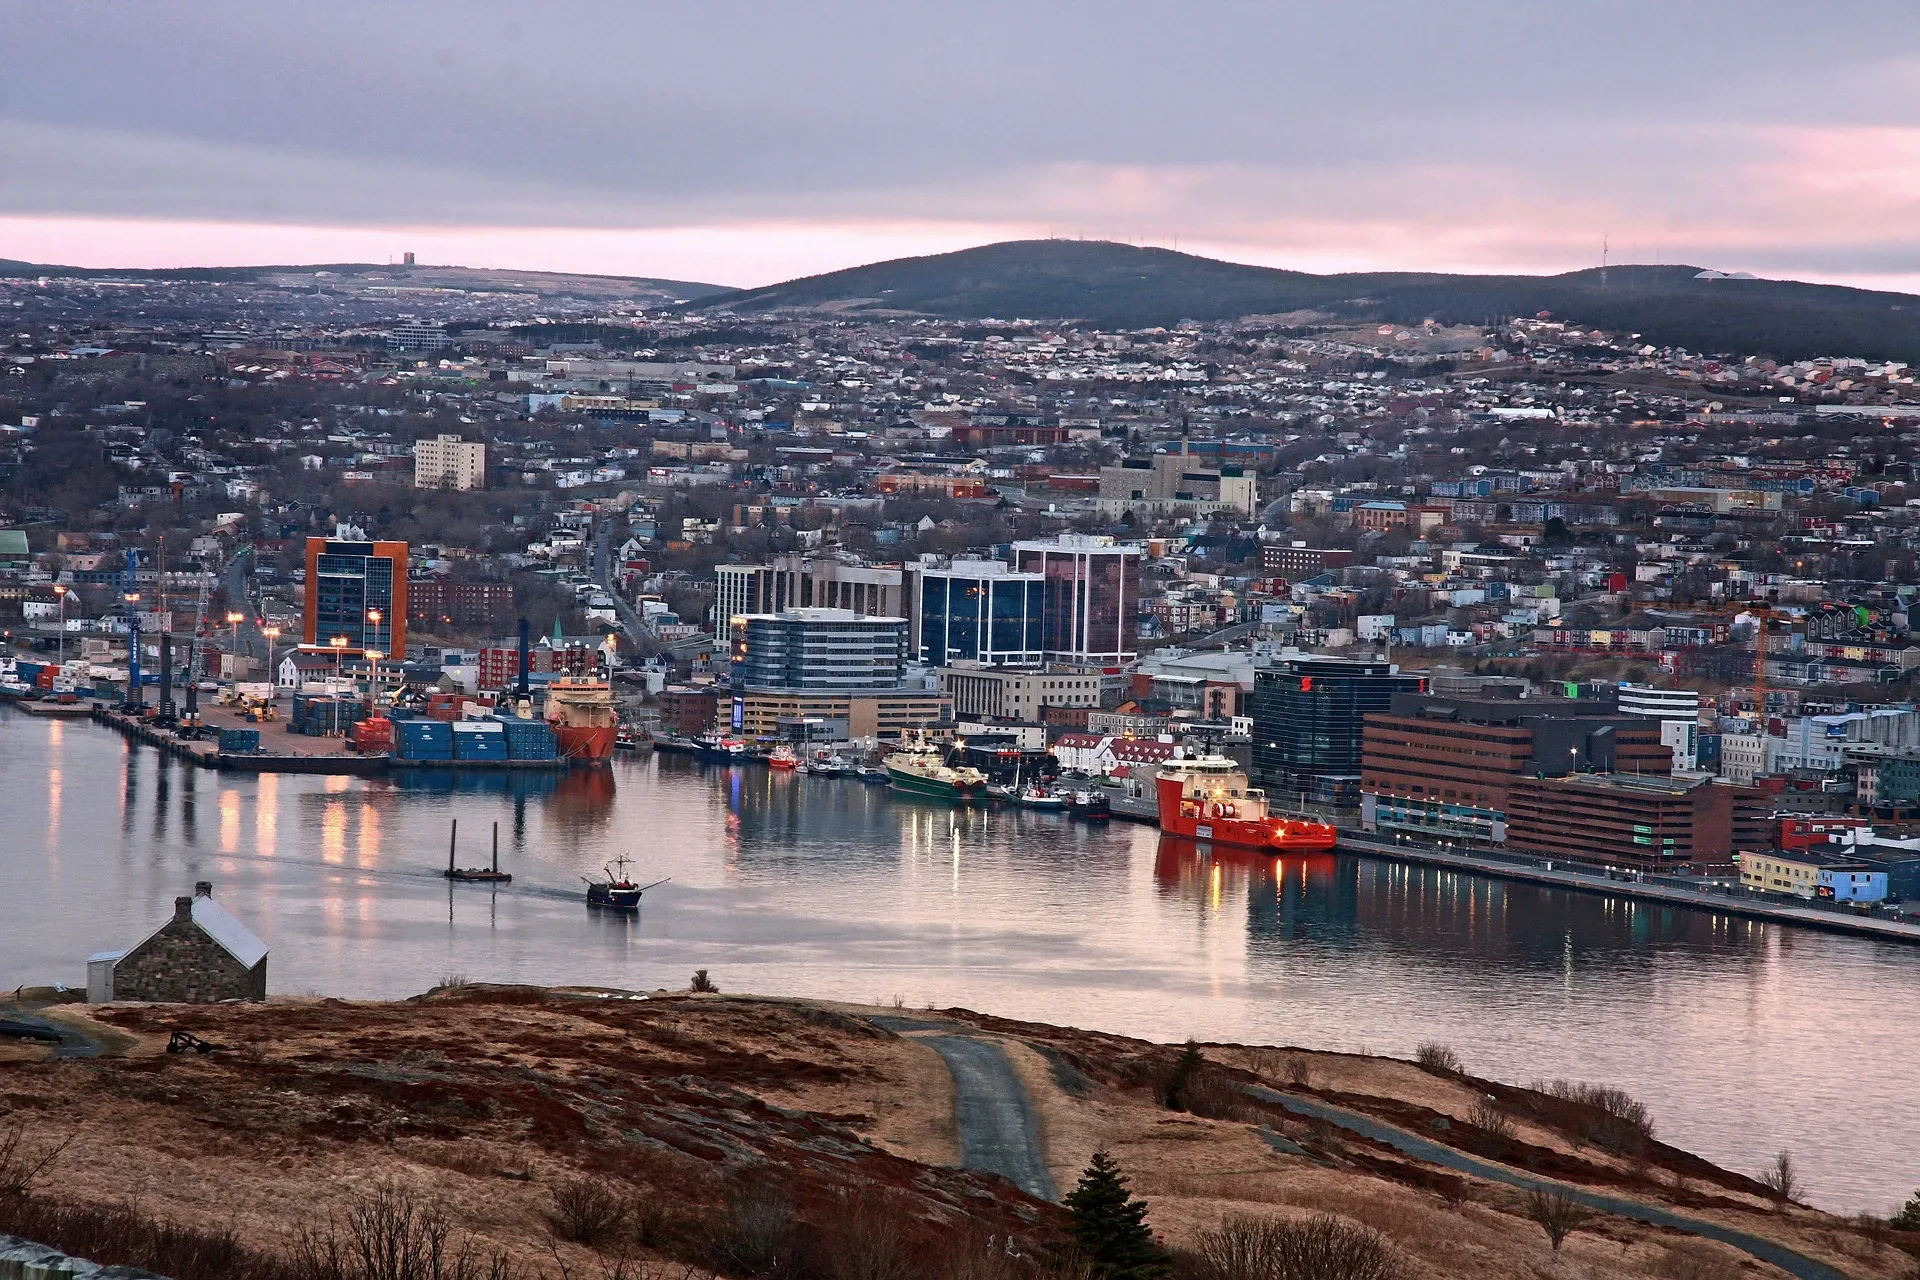 The Best Hotels In St. John's Newfoundland For Your Stay